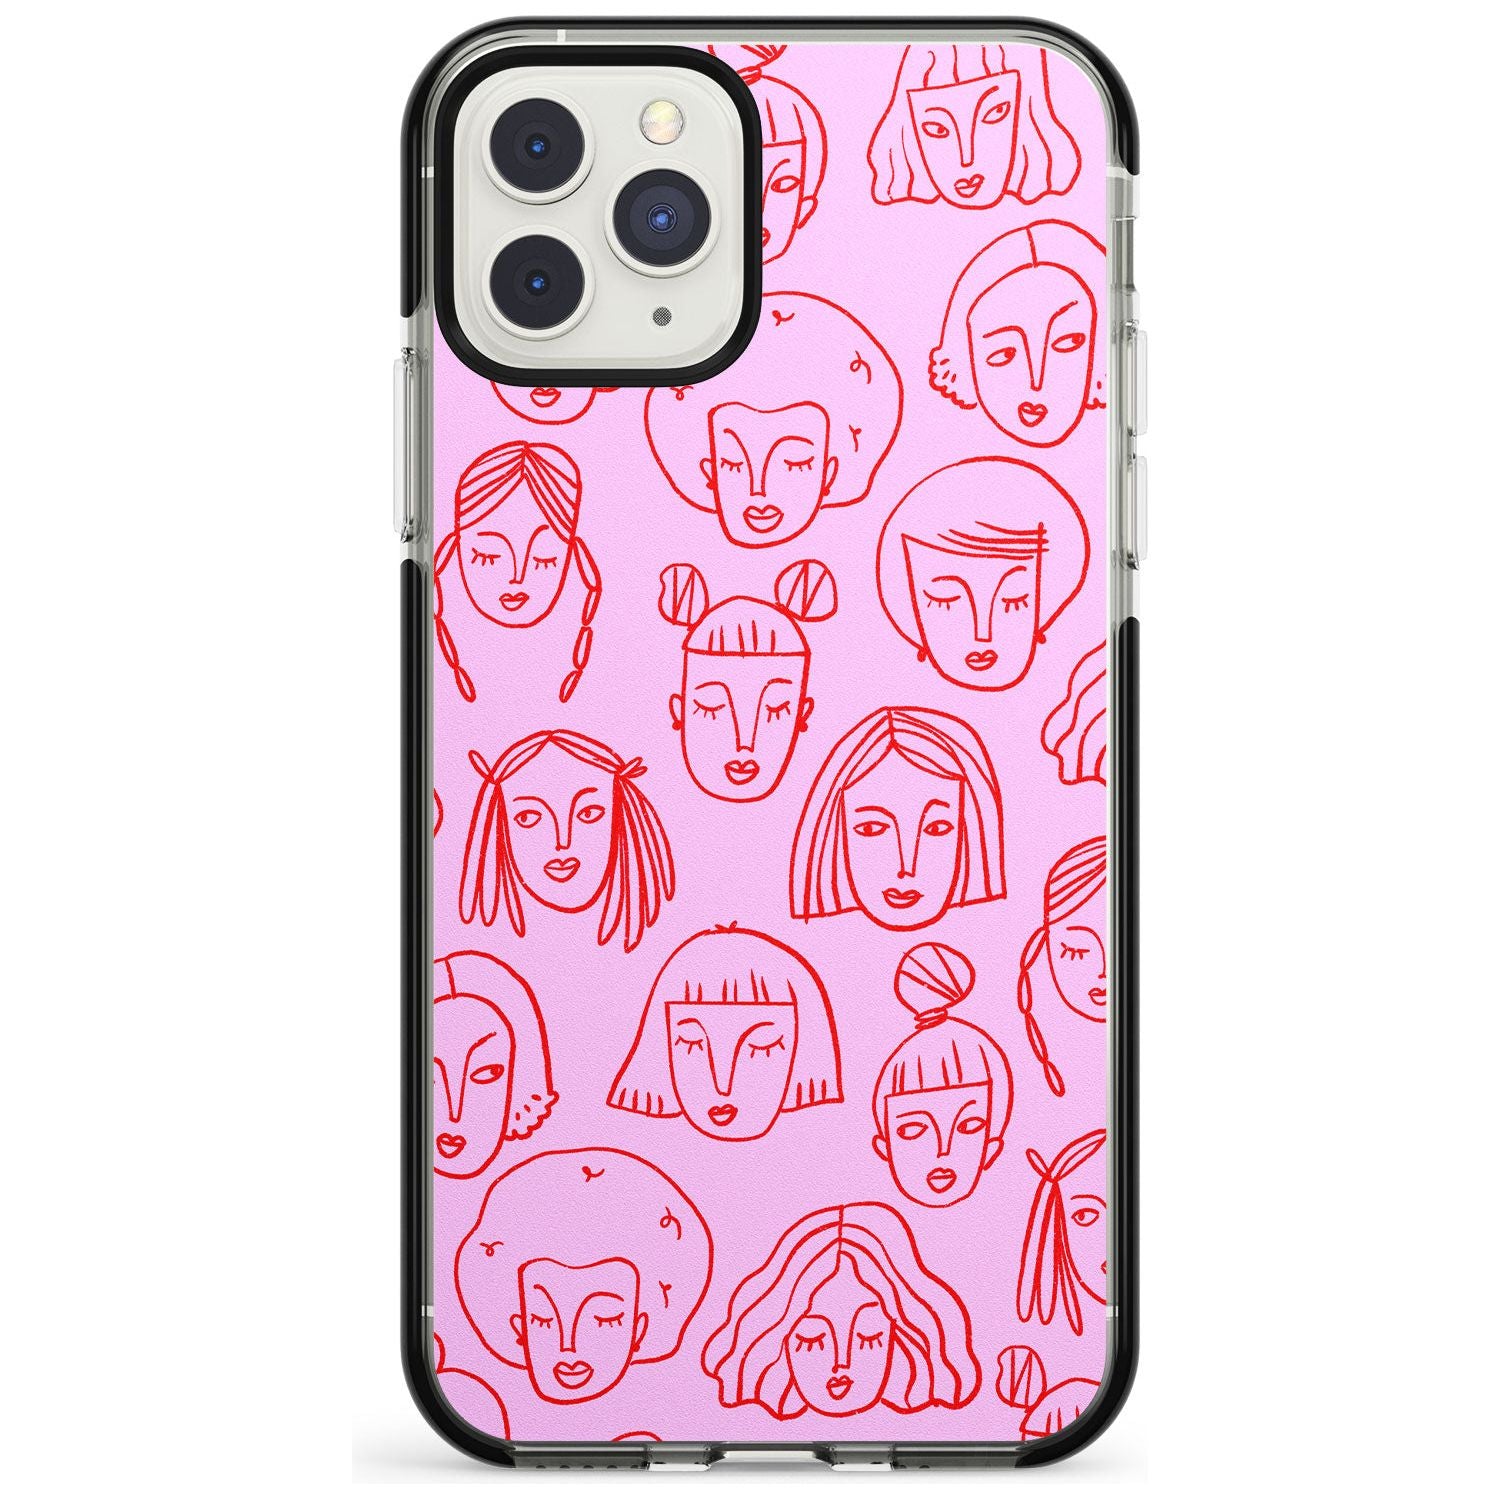 Girl Portrait Doodles in Pink & Red Black Impact Phone Case for iPhone 11 Pro Max